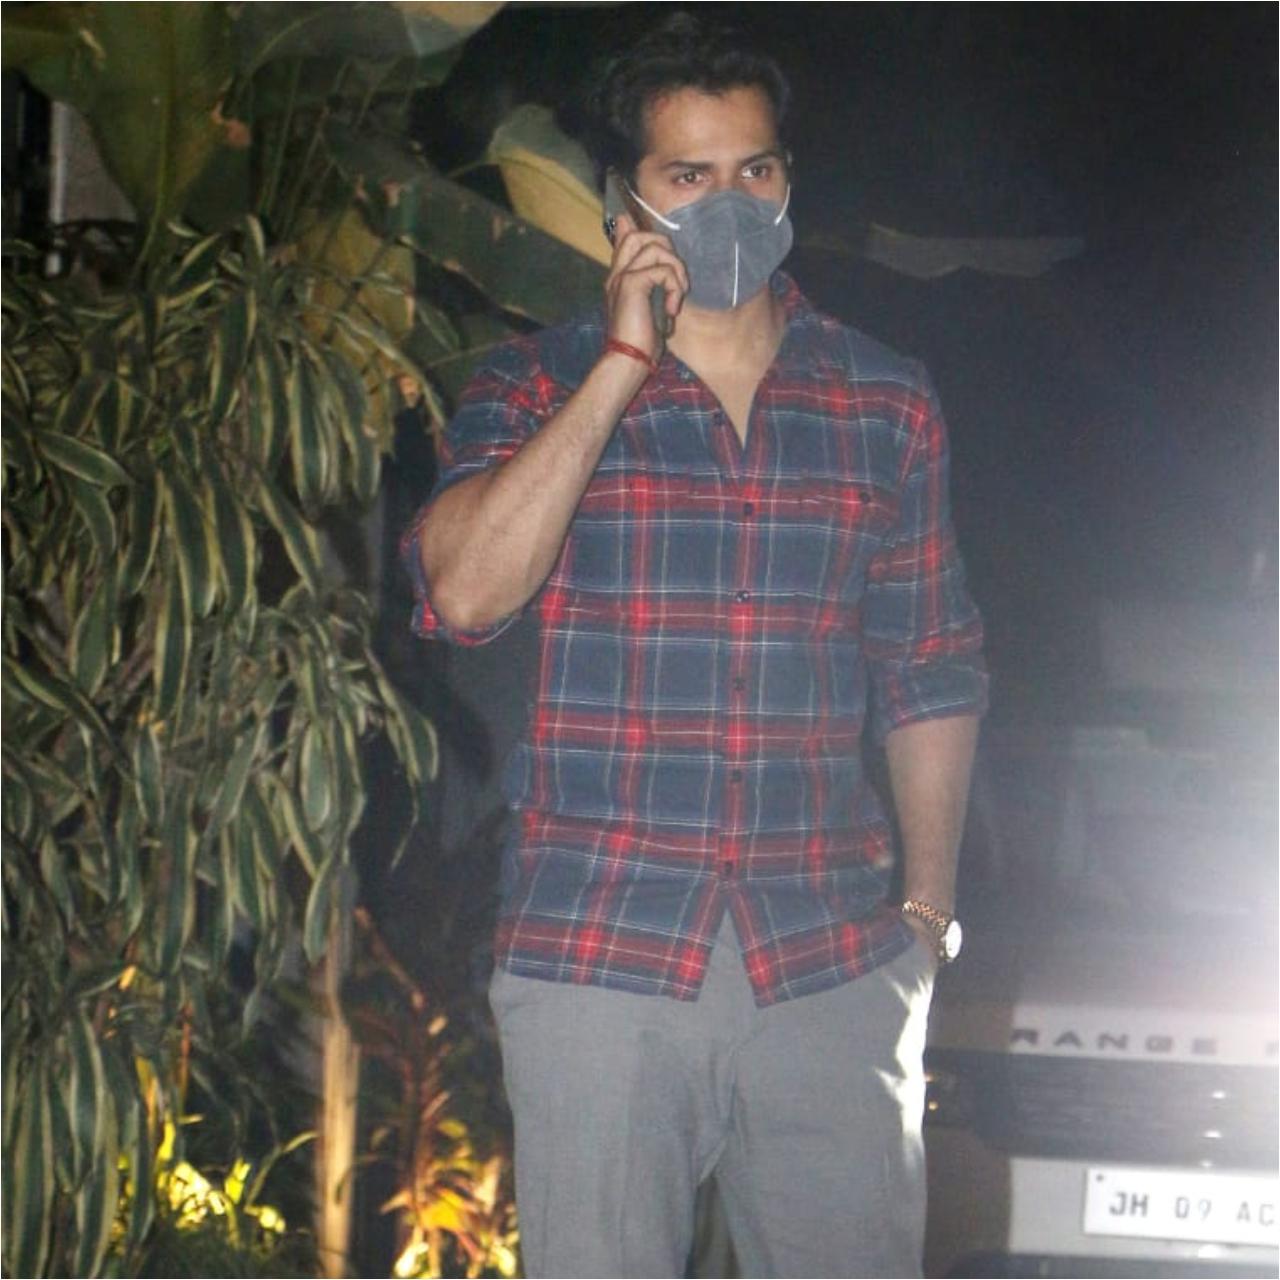 The actor was later clicked in Bandra. It is also said that the duo, and their near and dear ones, will have a three-day-long celebration by the beach from 22 to 24 of January. Apparently, invites have already been sent out to family and friends asking them to block their dates from January 22 to 25, and the preparations are in full swing.